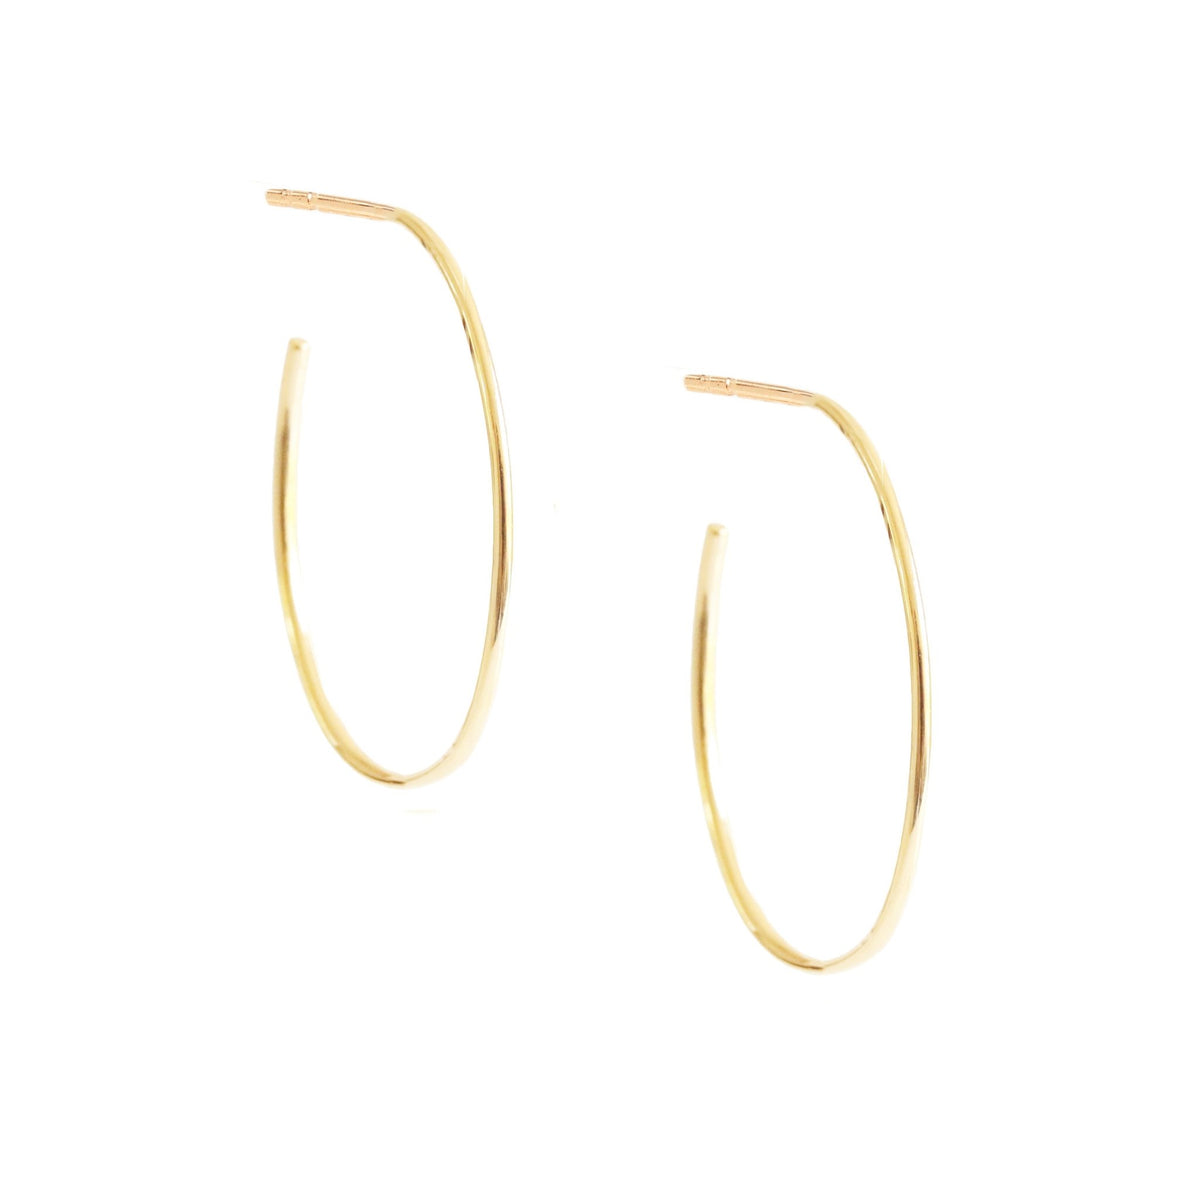 POISE HOOPS - GOLD - SO PRETTY CARA COTTER